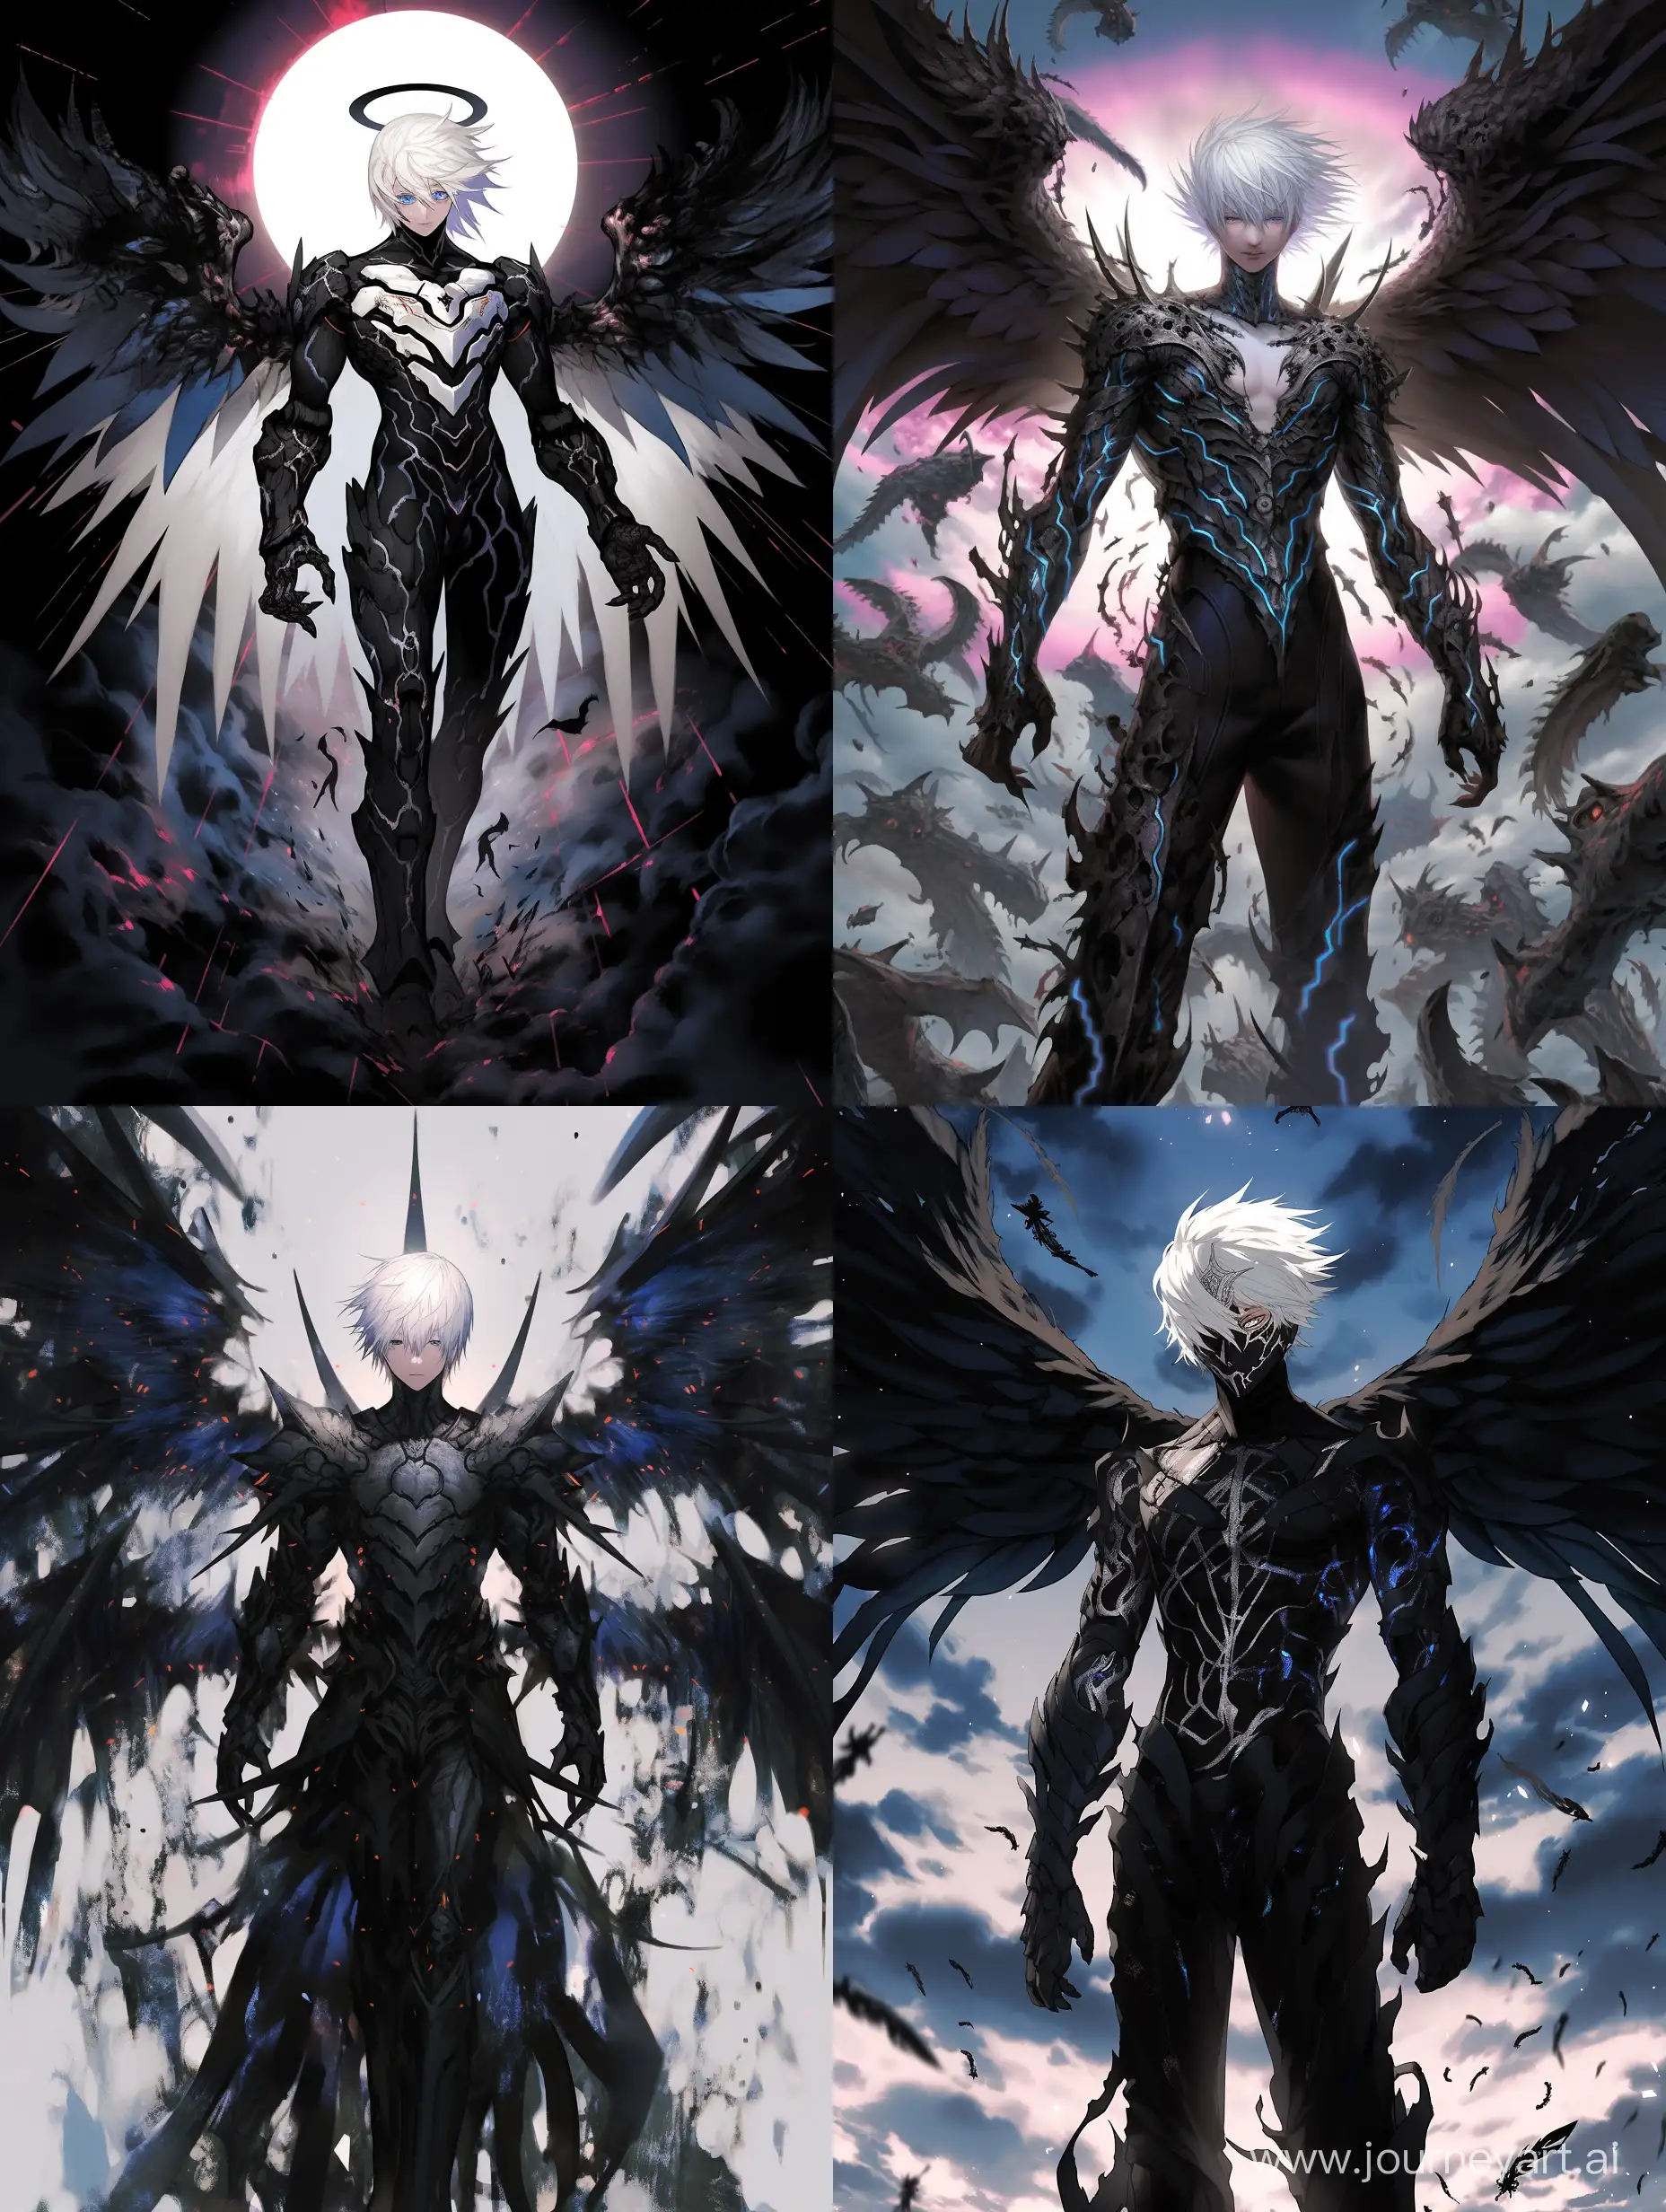 man dark angel with large black wings, standing in front of a sky background with white and blue hues, the angel has white hair and is wearing a armor-like outfit, the wings are spread out and there are black paint drips trailing from them, --niji 5